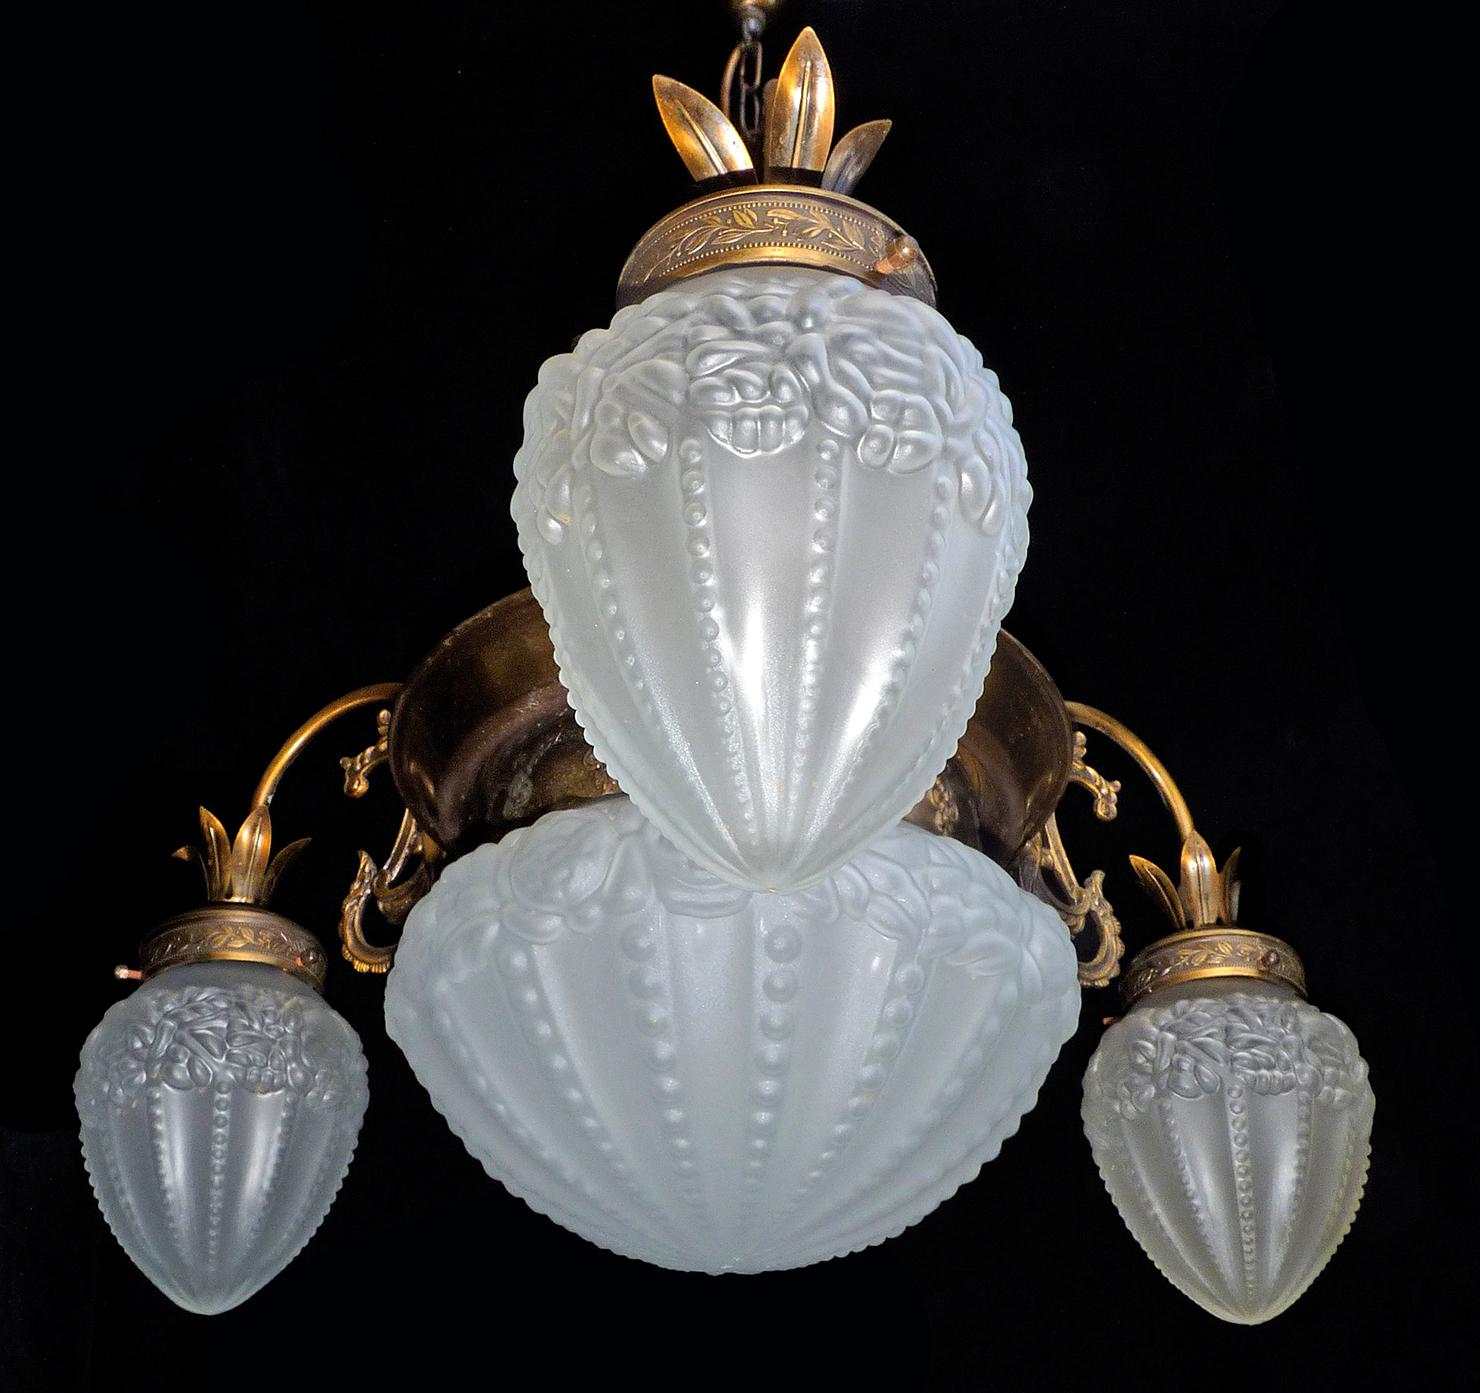 French Degué style Art Deco white frosted glass, 4-light brass chandelier/ gold and bronze color metal with patina.
4 bulbs E14
Good working condition / European rewired
Measures: Diameter 28.5 in / 72 cm
Height 32 in / 80 cm
Glass shades: 6 in